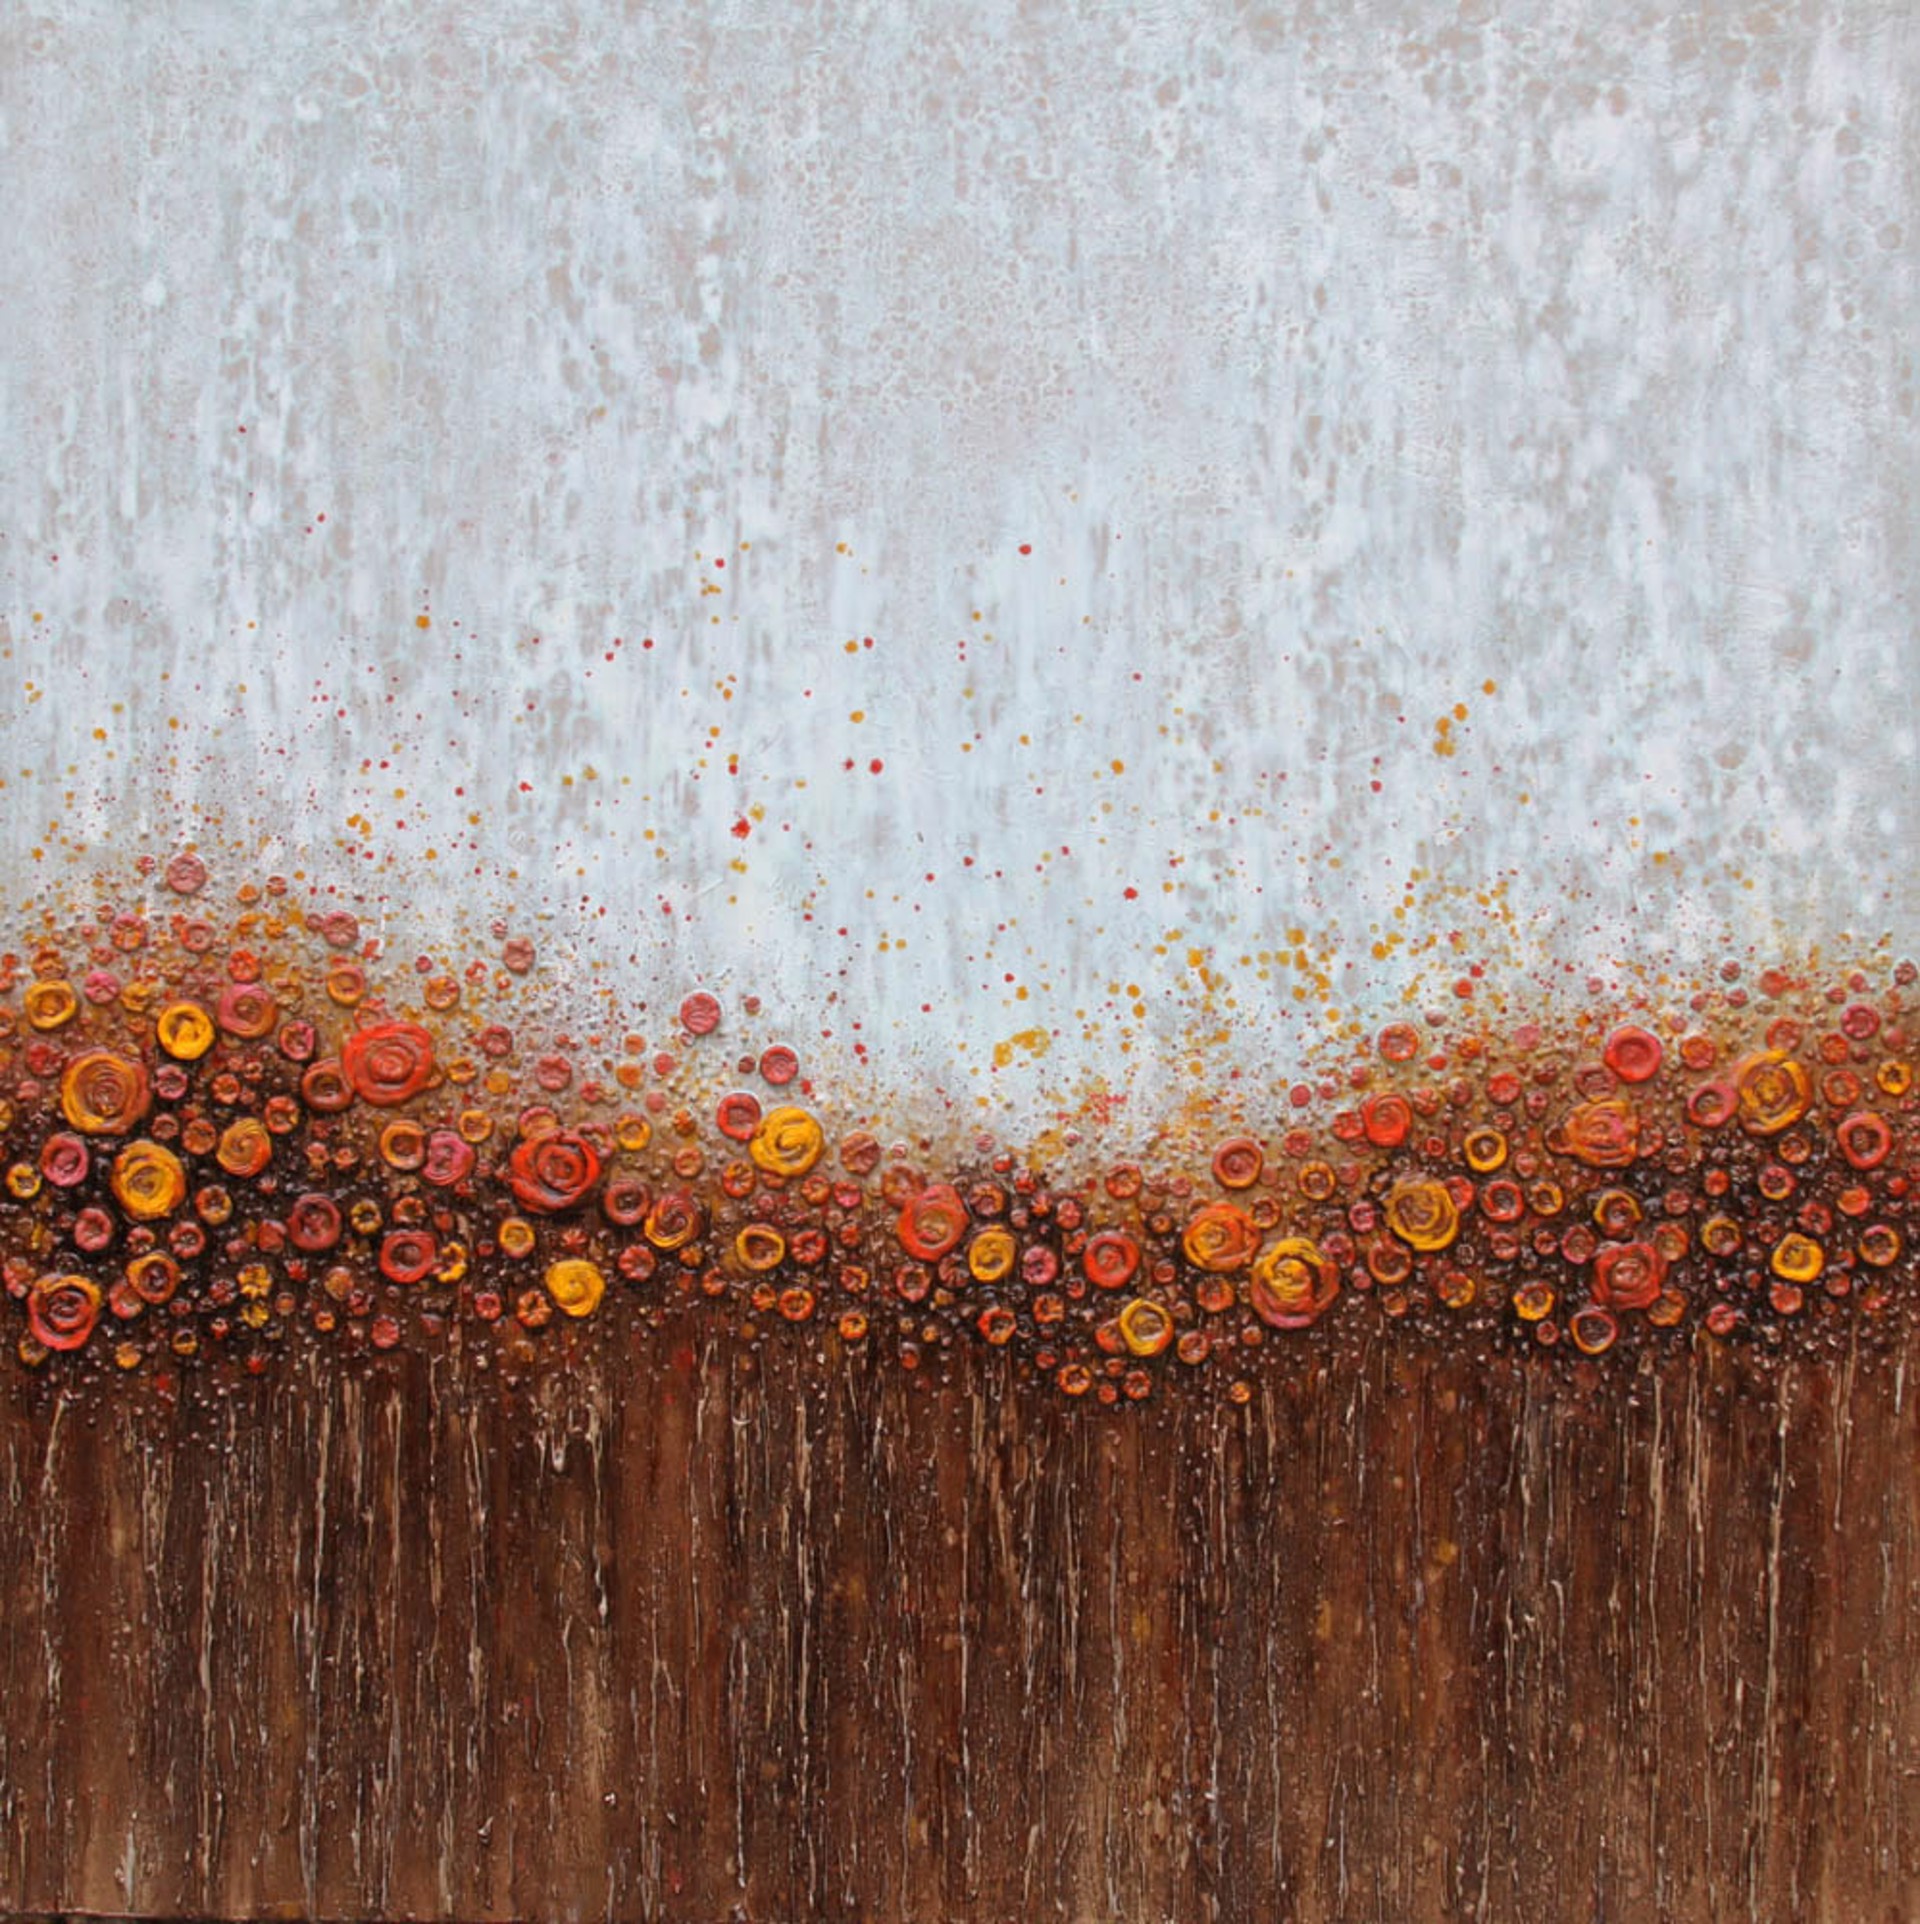 Field Of Poppies by Susan Nuttall